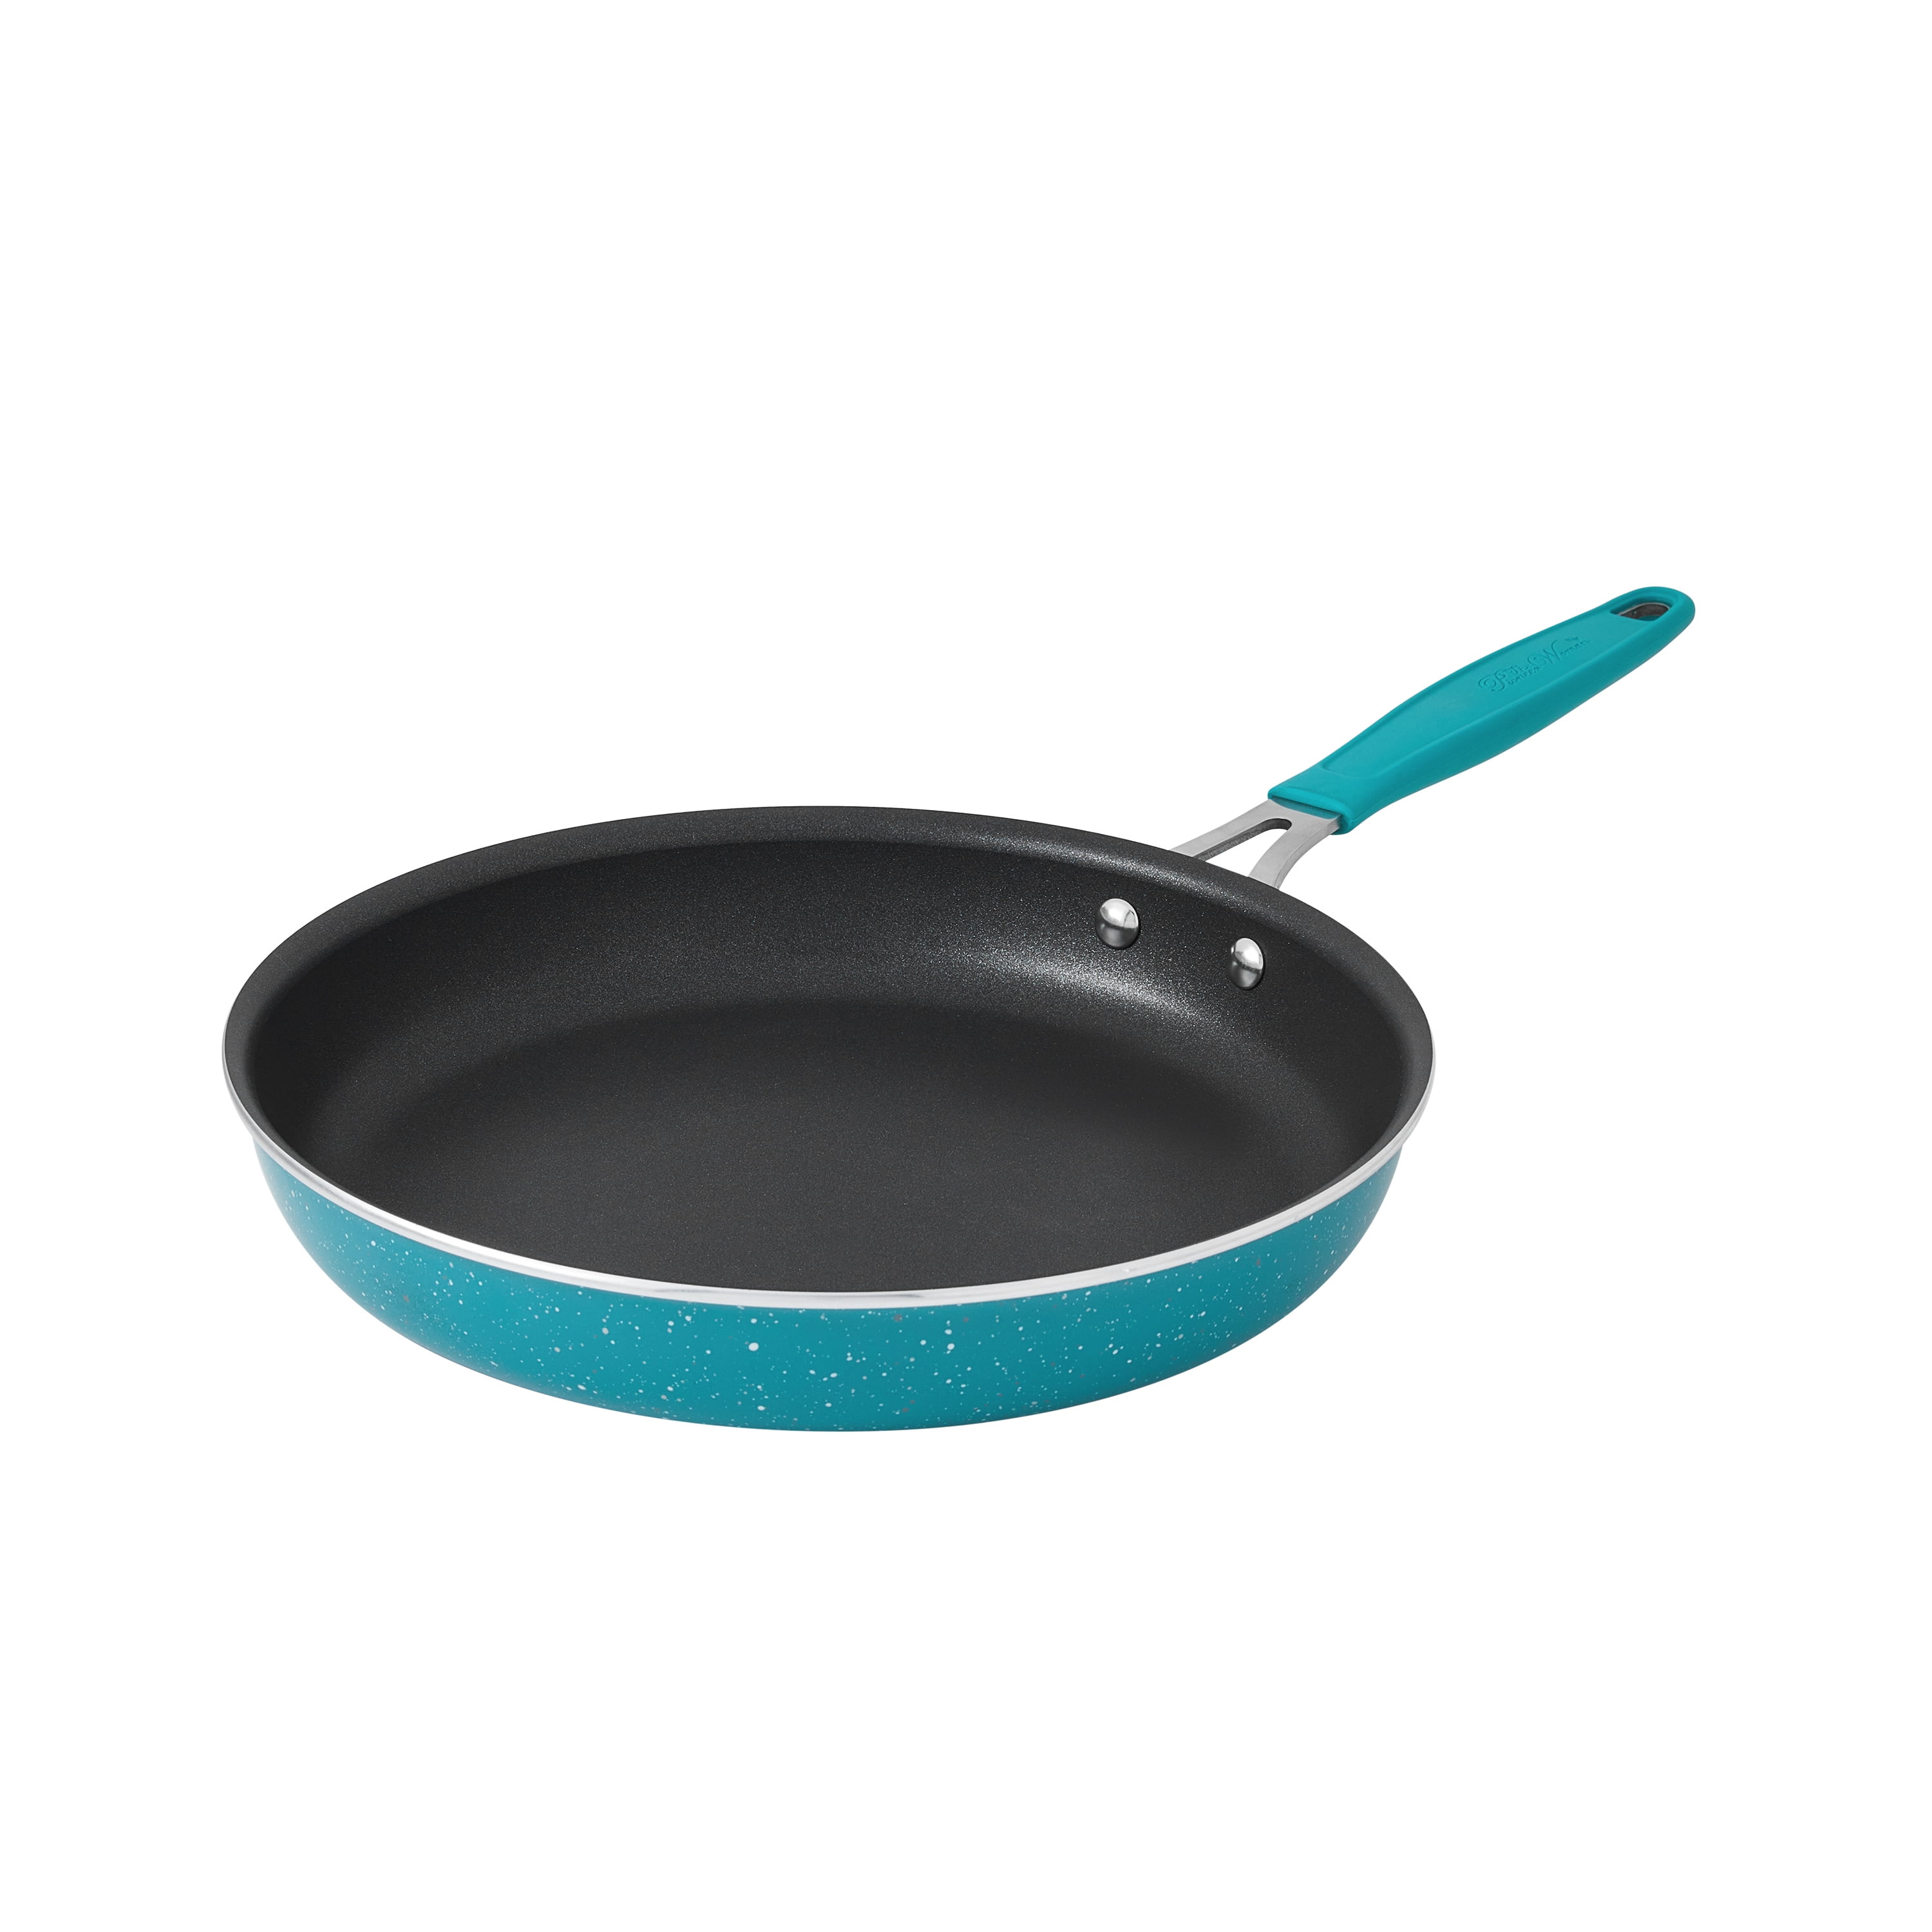 Lycka AMB-1937 Diamond Coat Pot Frying Pan, 11-Piece Set, Turquoise, Detachable Handle, Induction GAS and Oven Cookable, Dishwasher Safe